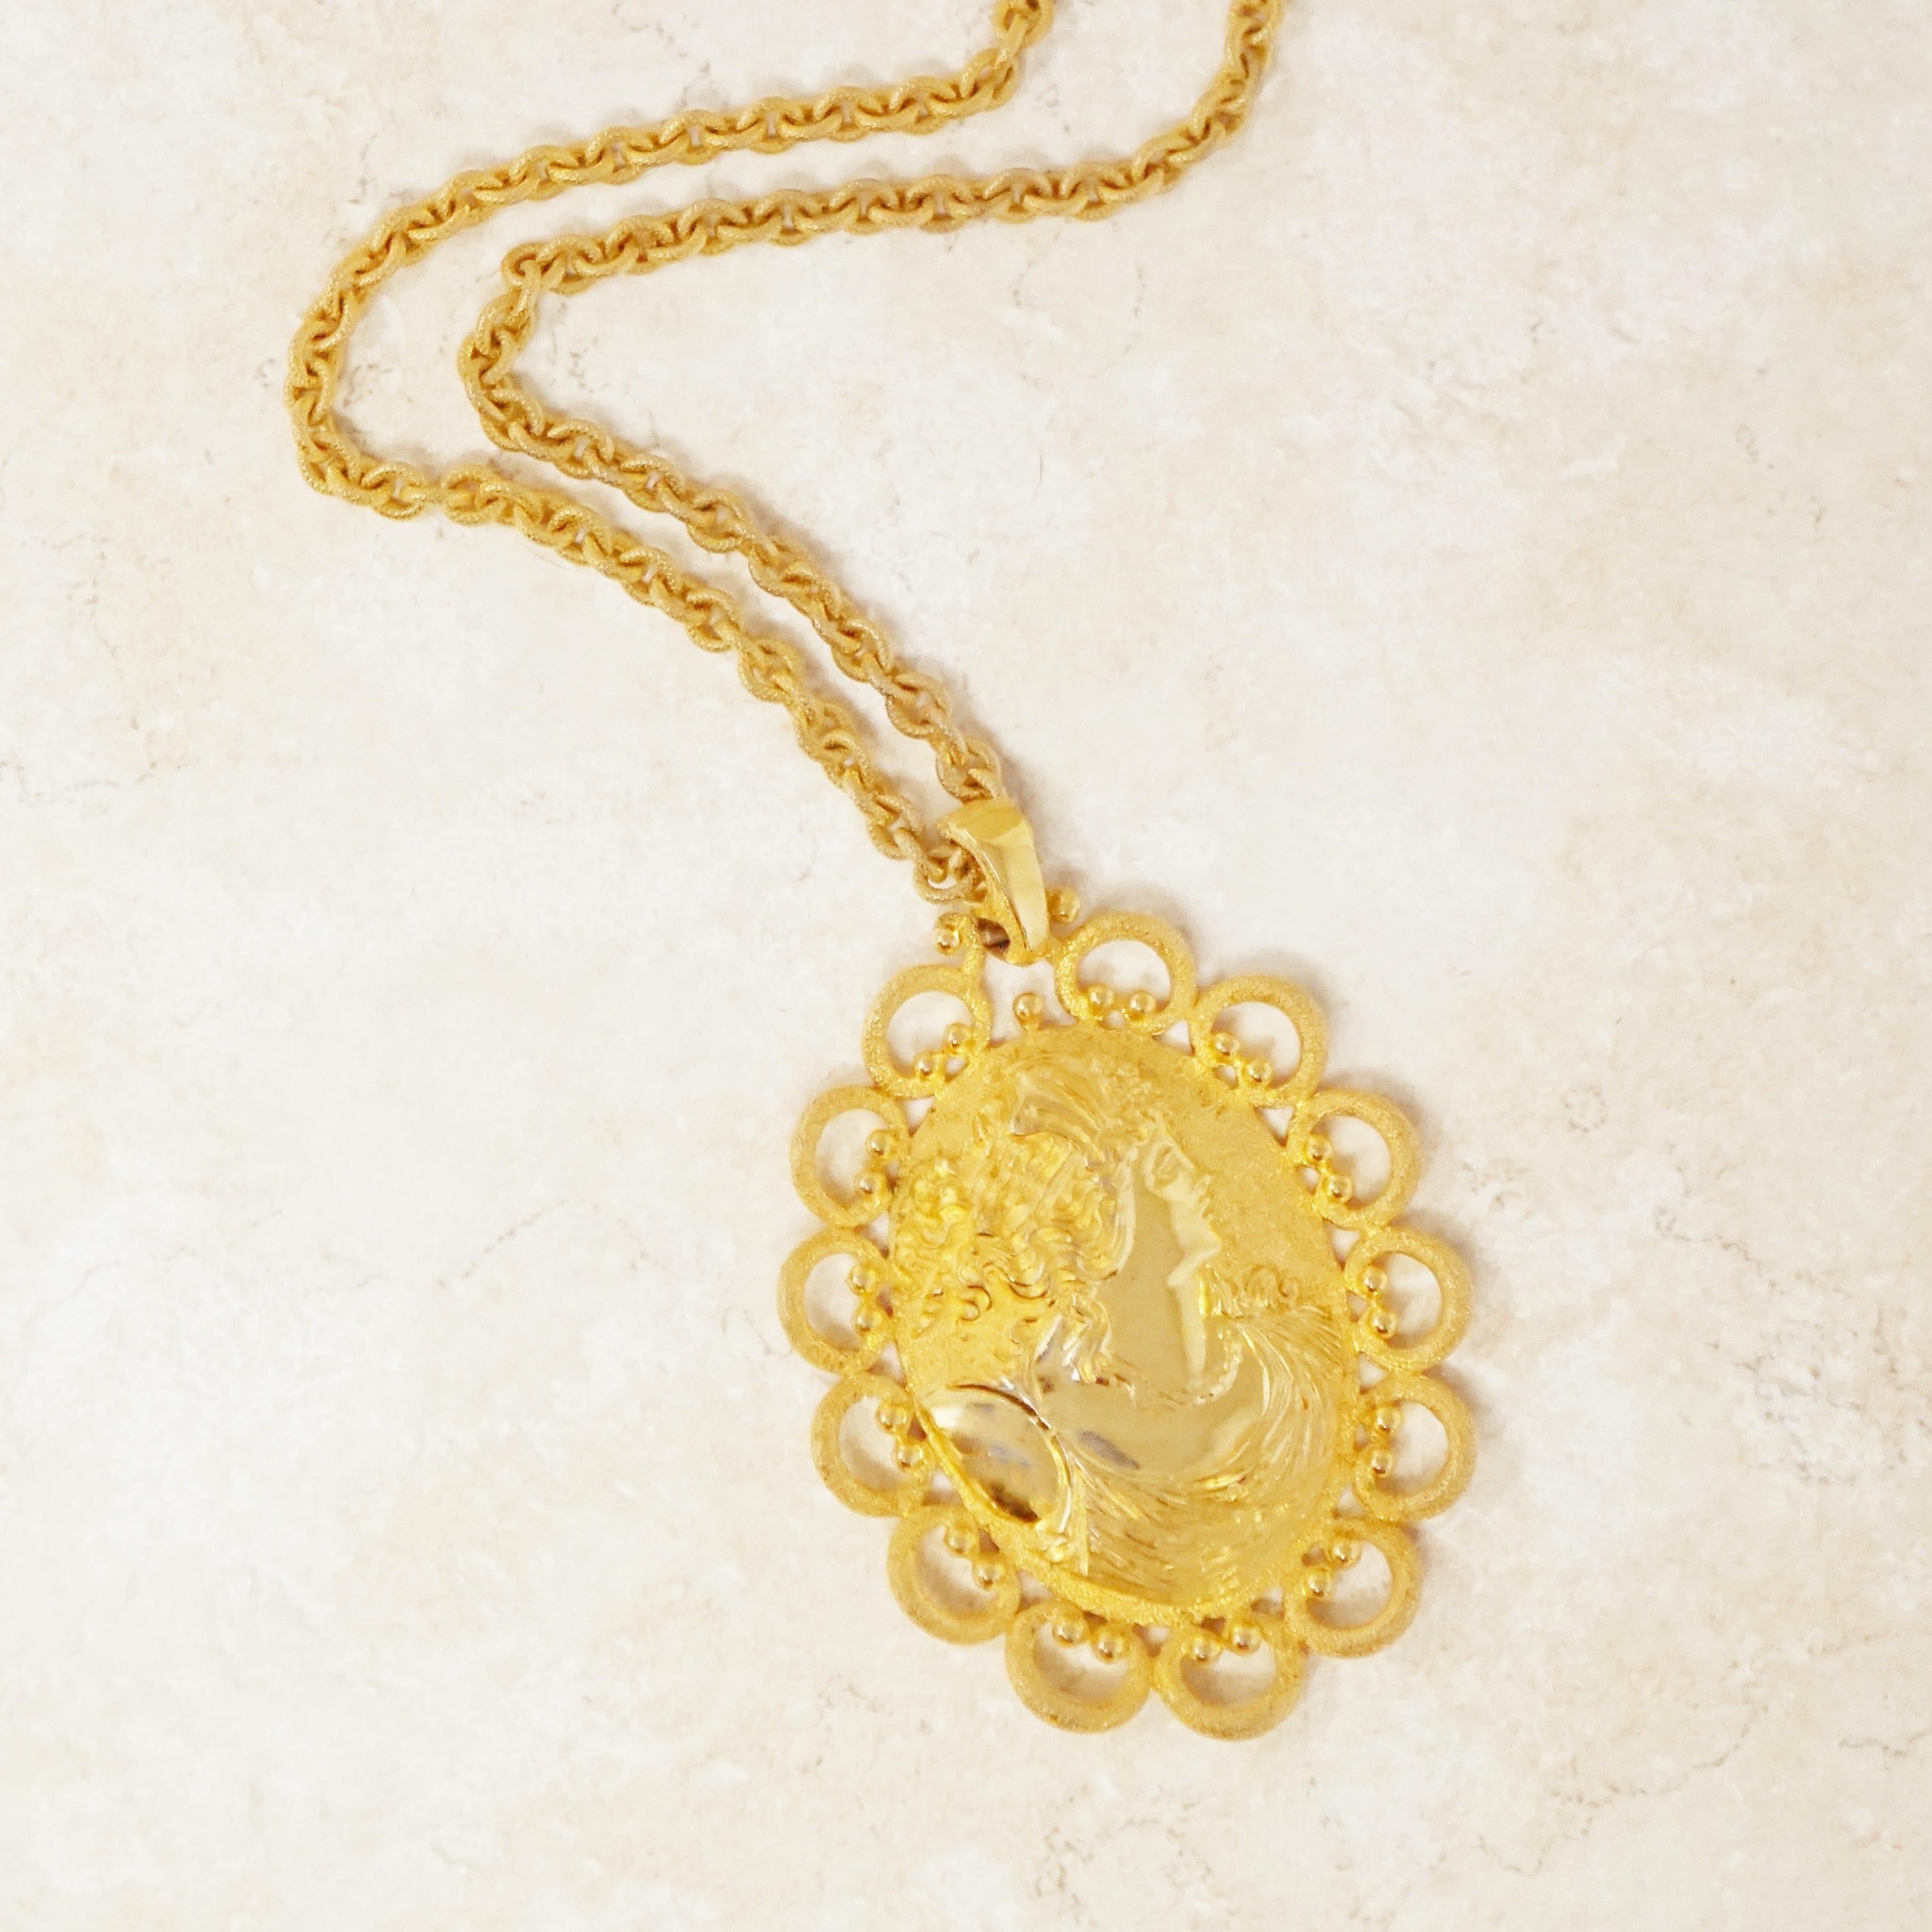 Vintage Gilded Roman Goddess Cameo Pendant Necklace by Trifari, 1960s For Sale 2